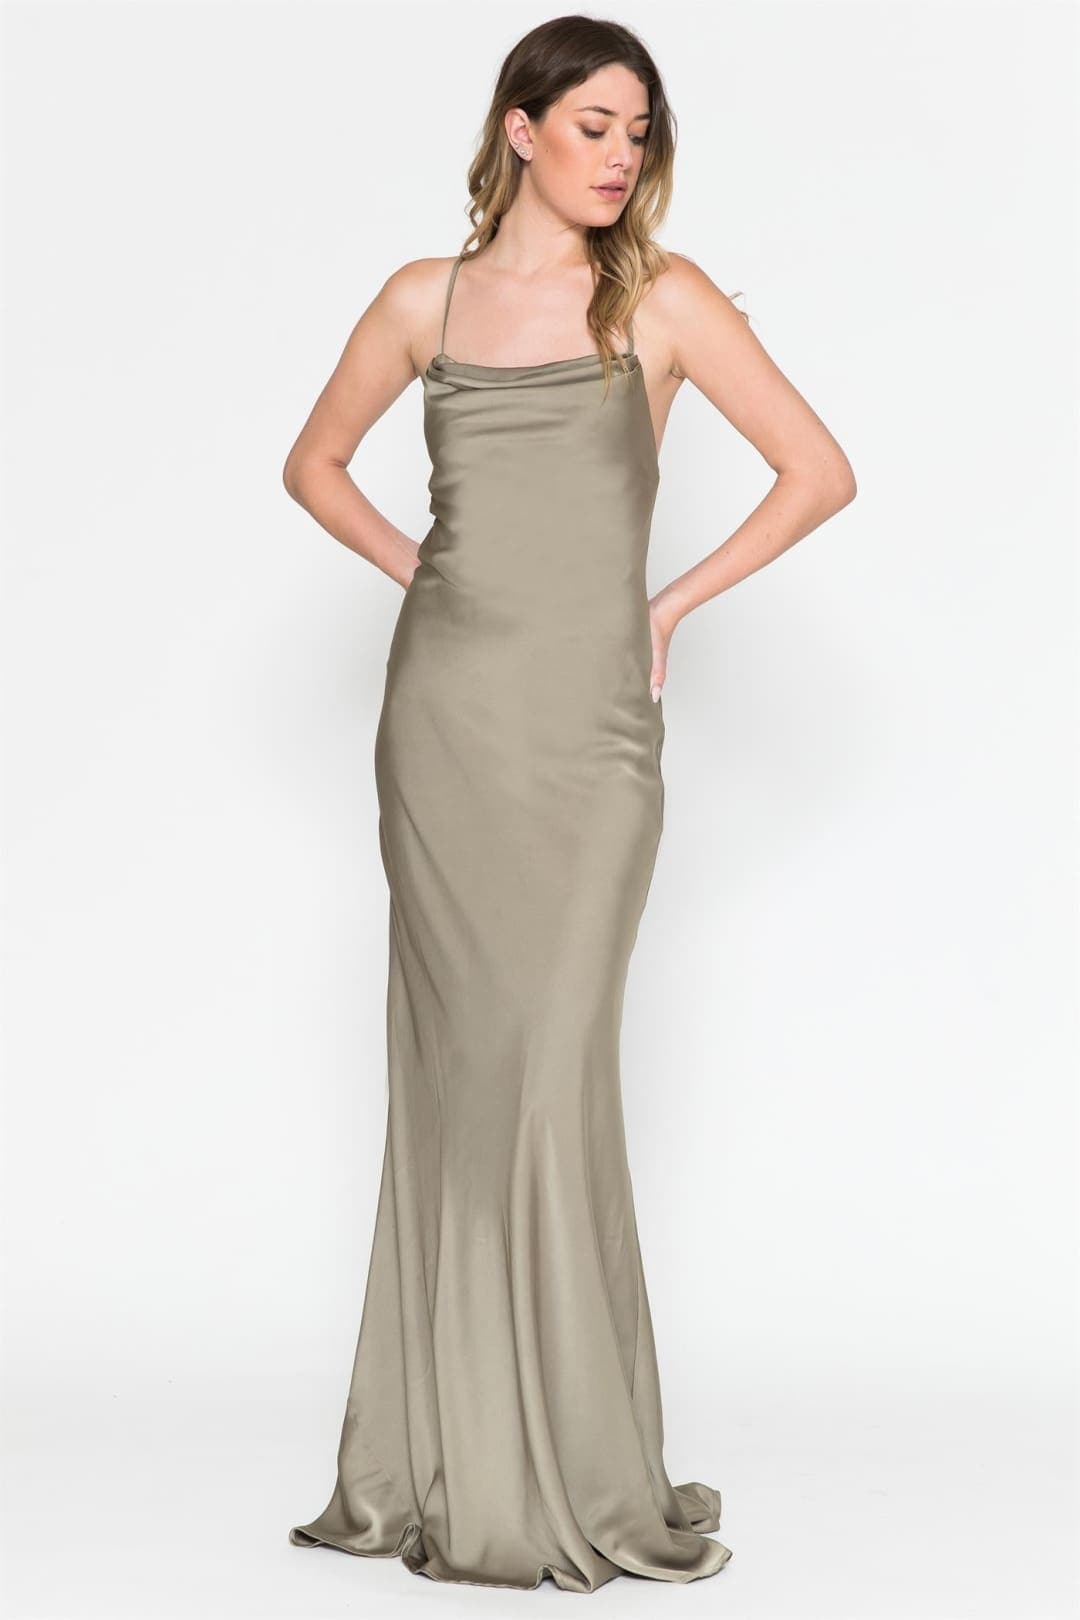 Simple & Classy Bridesmaids Dress - Olive Green / 2